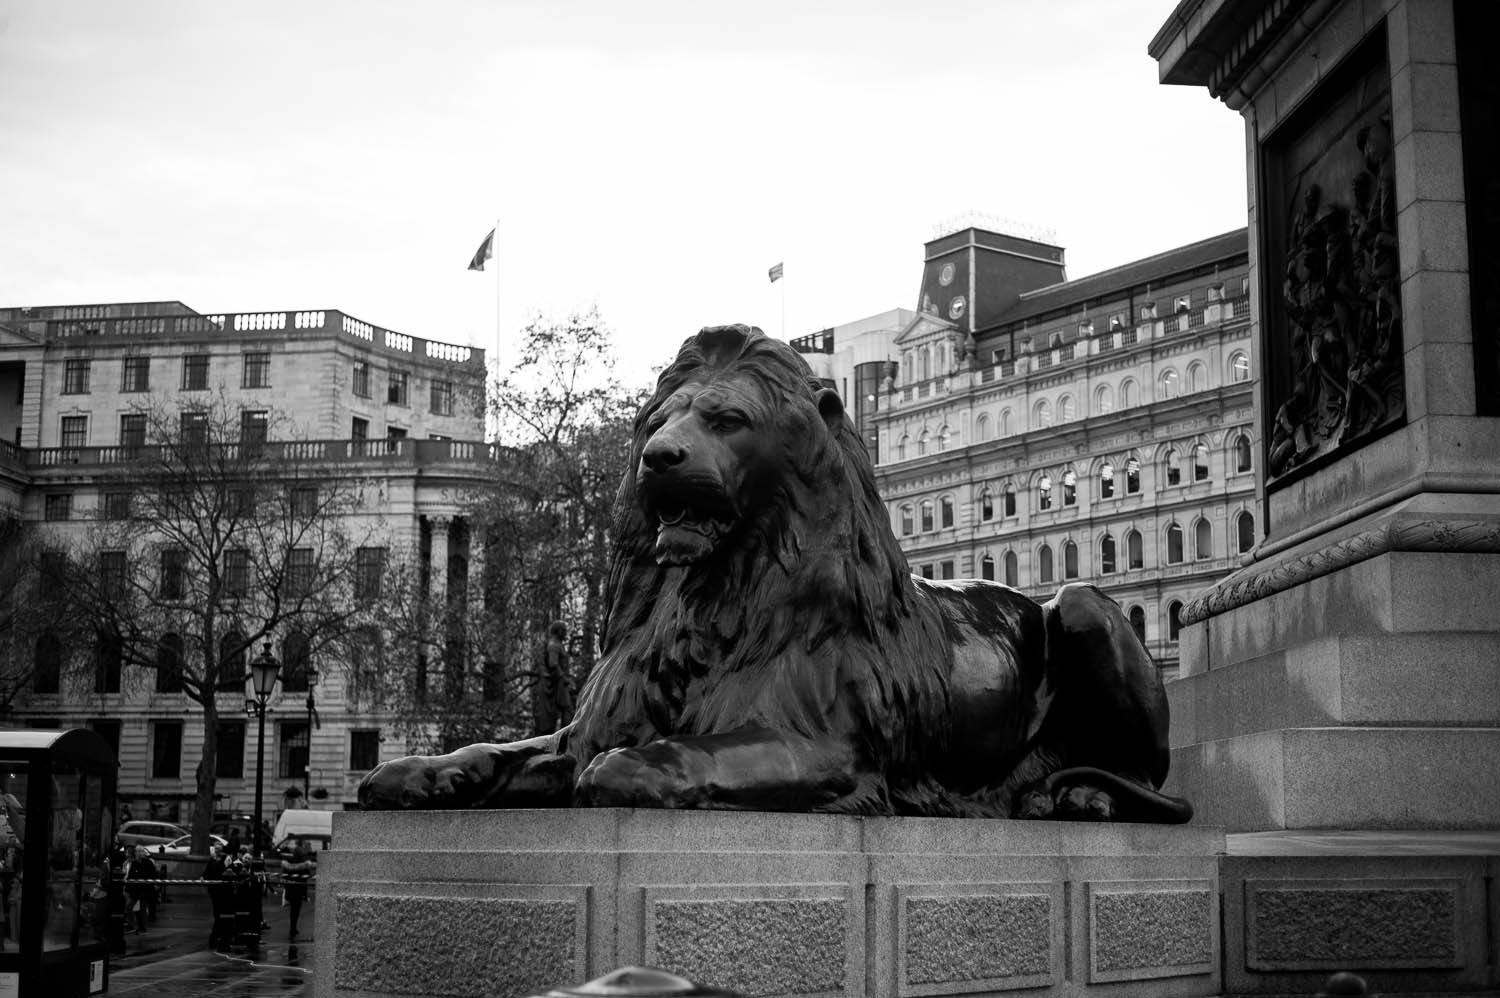 A lion statue in London